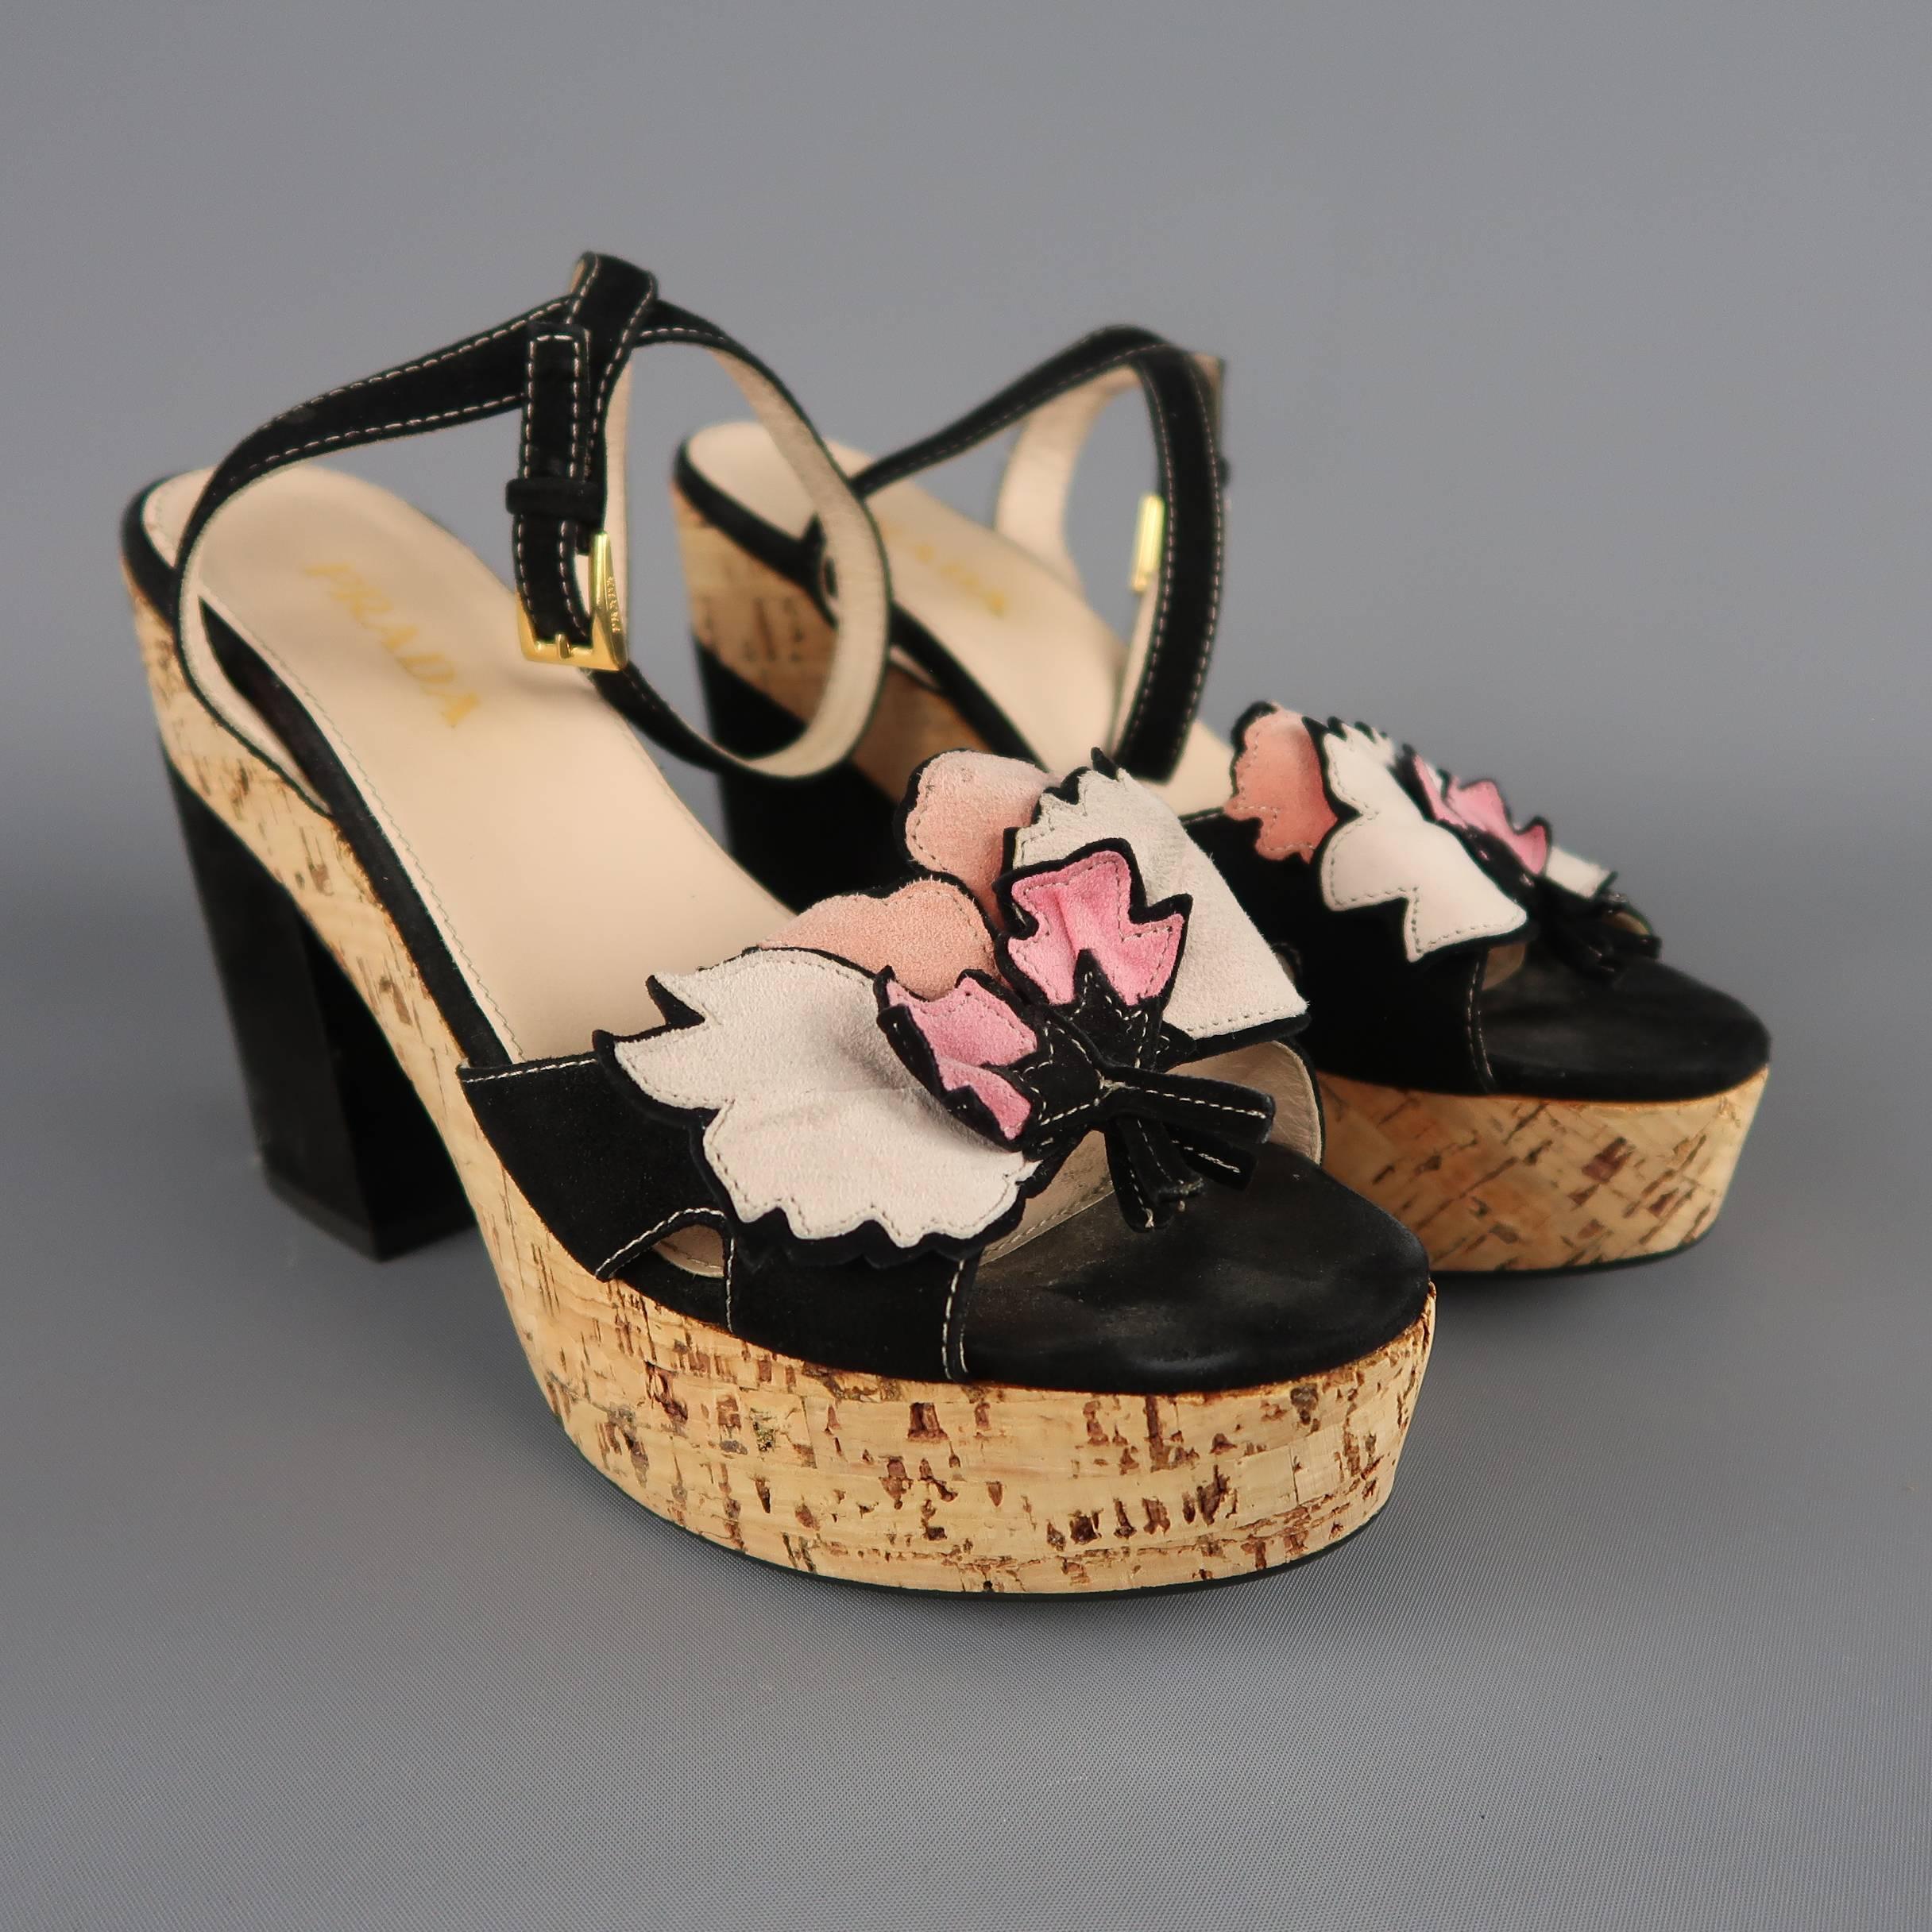 PRADA come in black suede with a pink suede applique toe strap, ankle harness, chunky covered heel, and thick cork platform. Wear throughout. Made in Italy.
 
Fair Pre-Owned Condition.
Marked: IT 36
 
Measurements:
 
Heel: 4.5 in.
Platform: 1.5 in.
